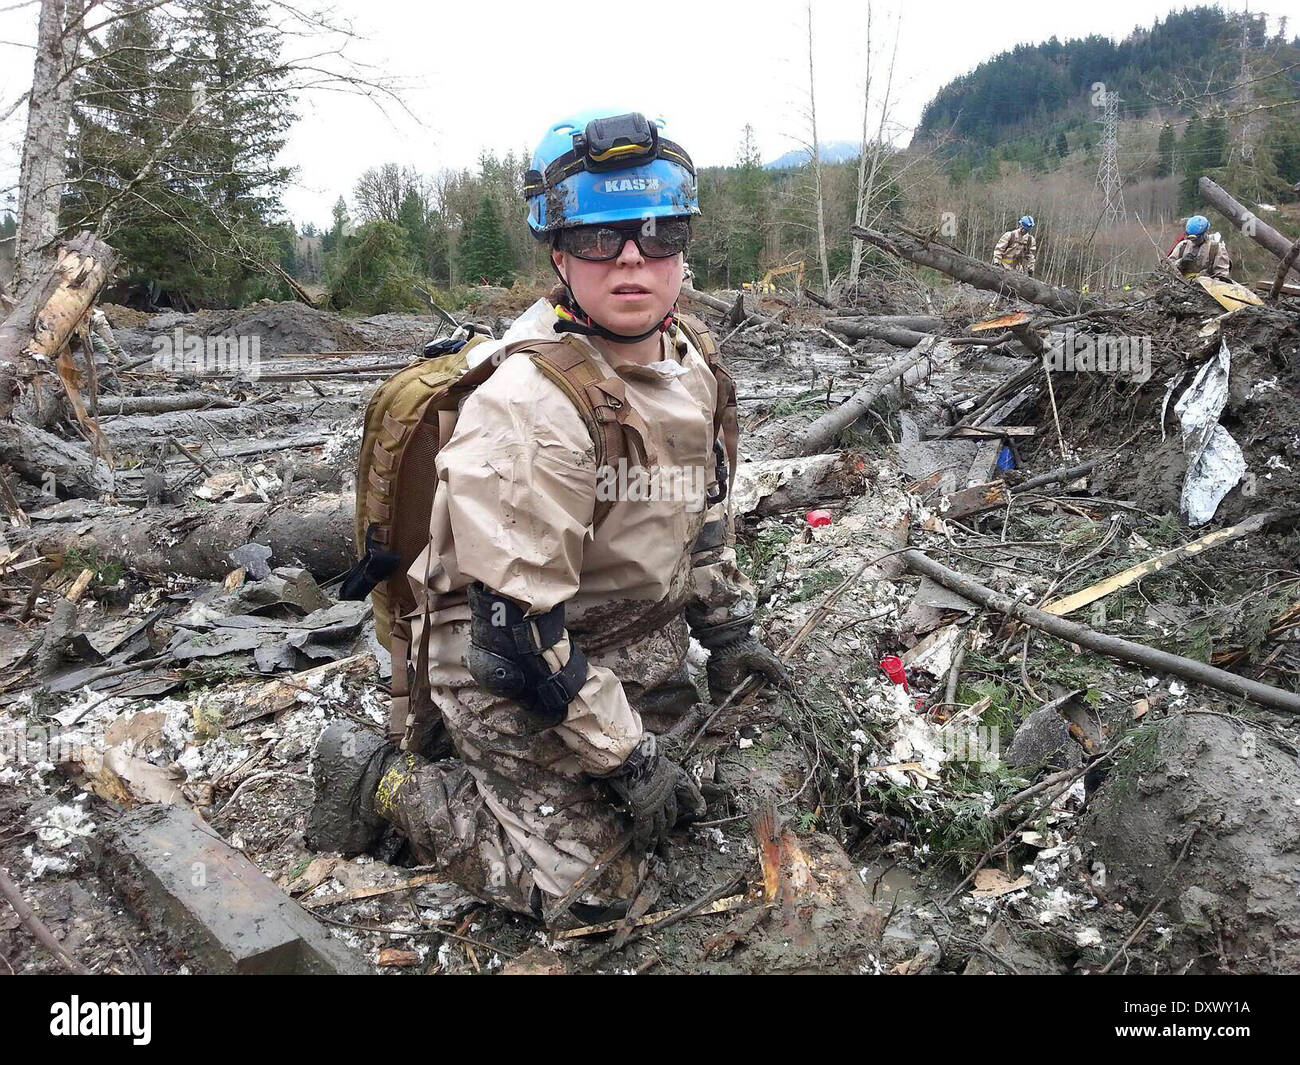 A rescue worker continue efforts to locate victims of a massive landslide that killed at least 28 people and destroyed a small riverside village in northwestern Washington state March 31, 2014 in Oso, Washington. Stock Photo